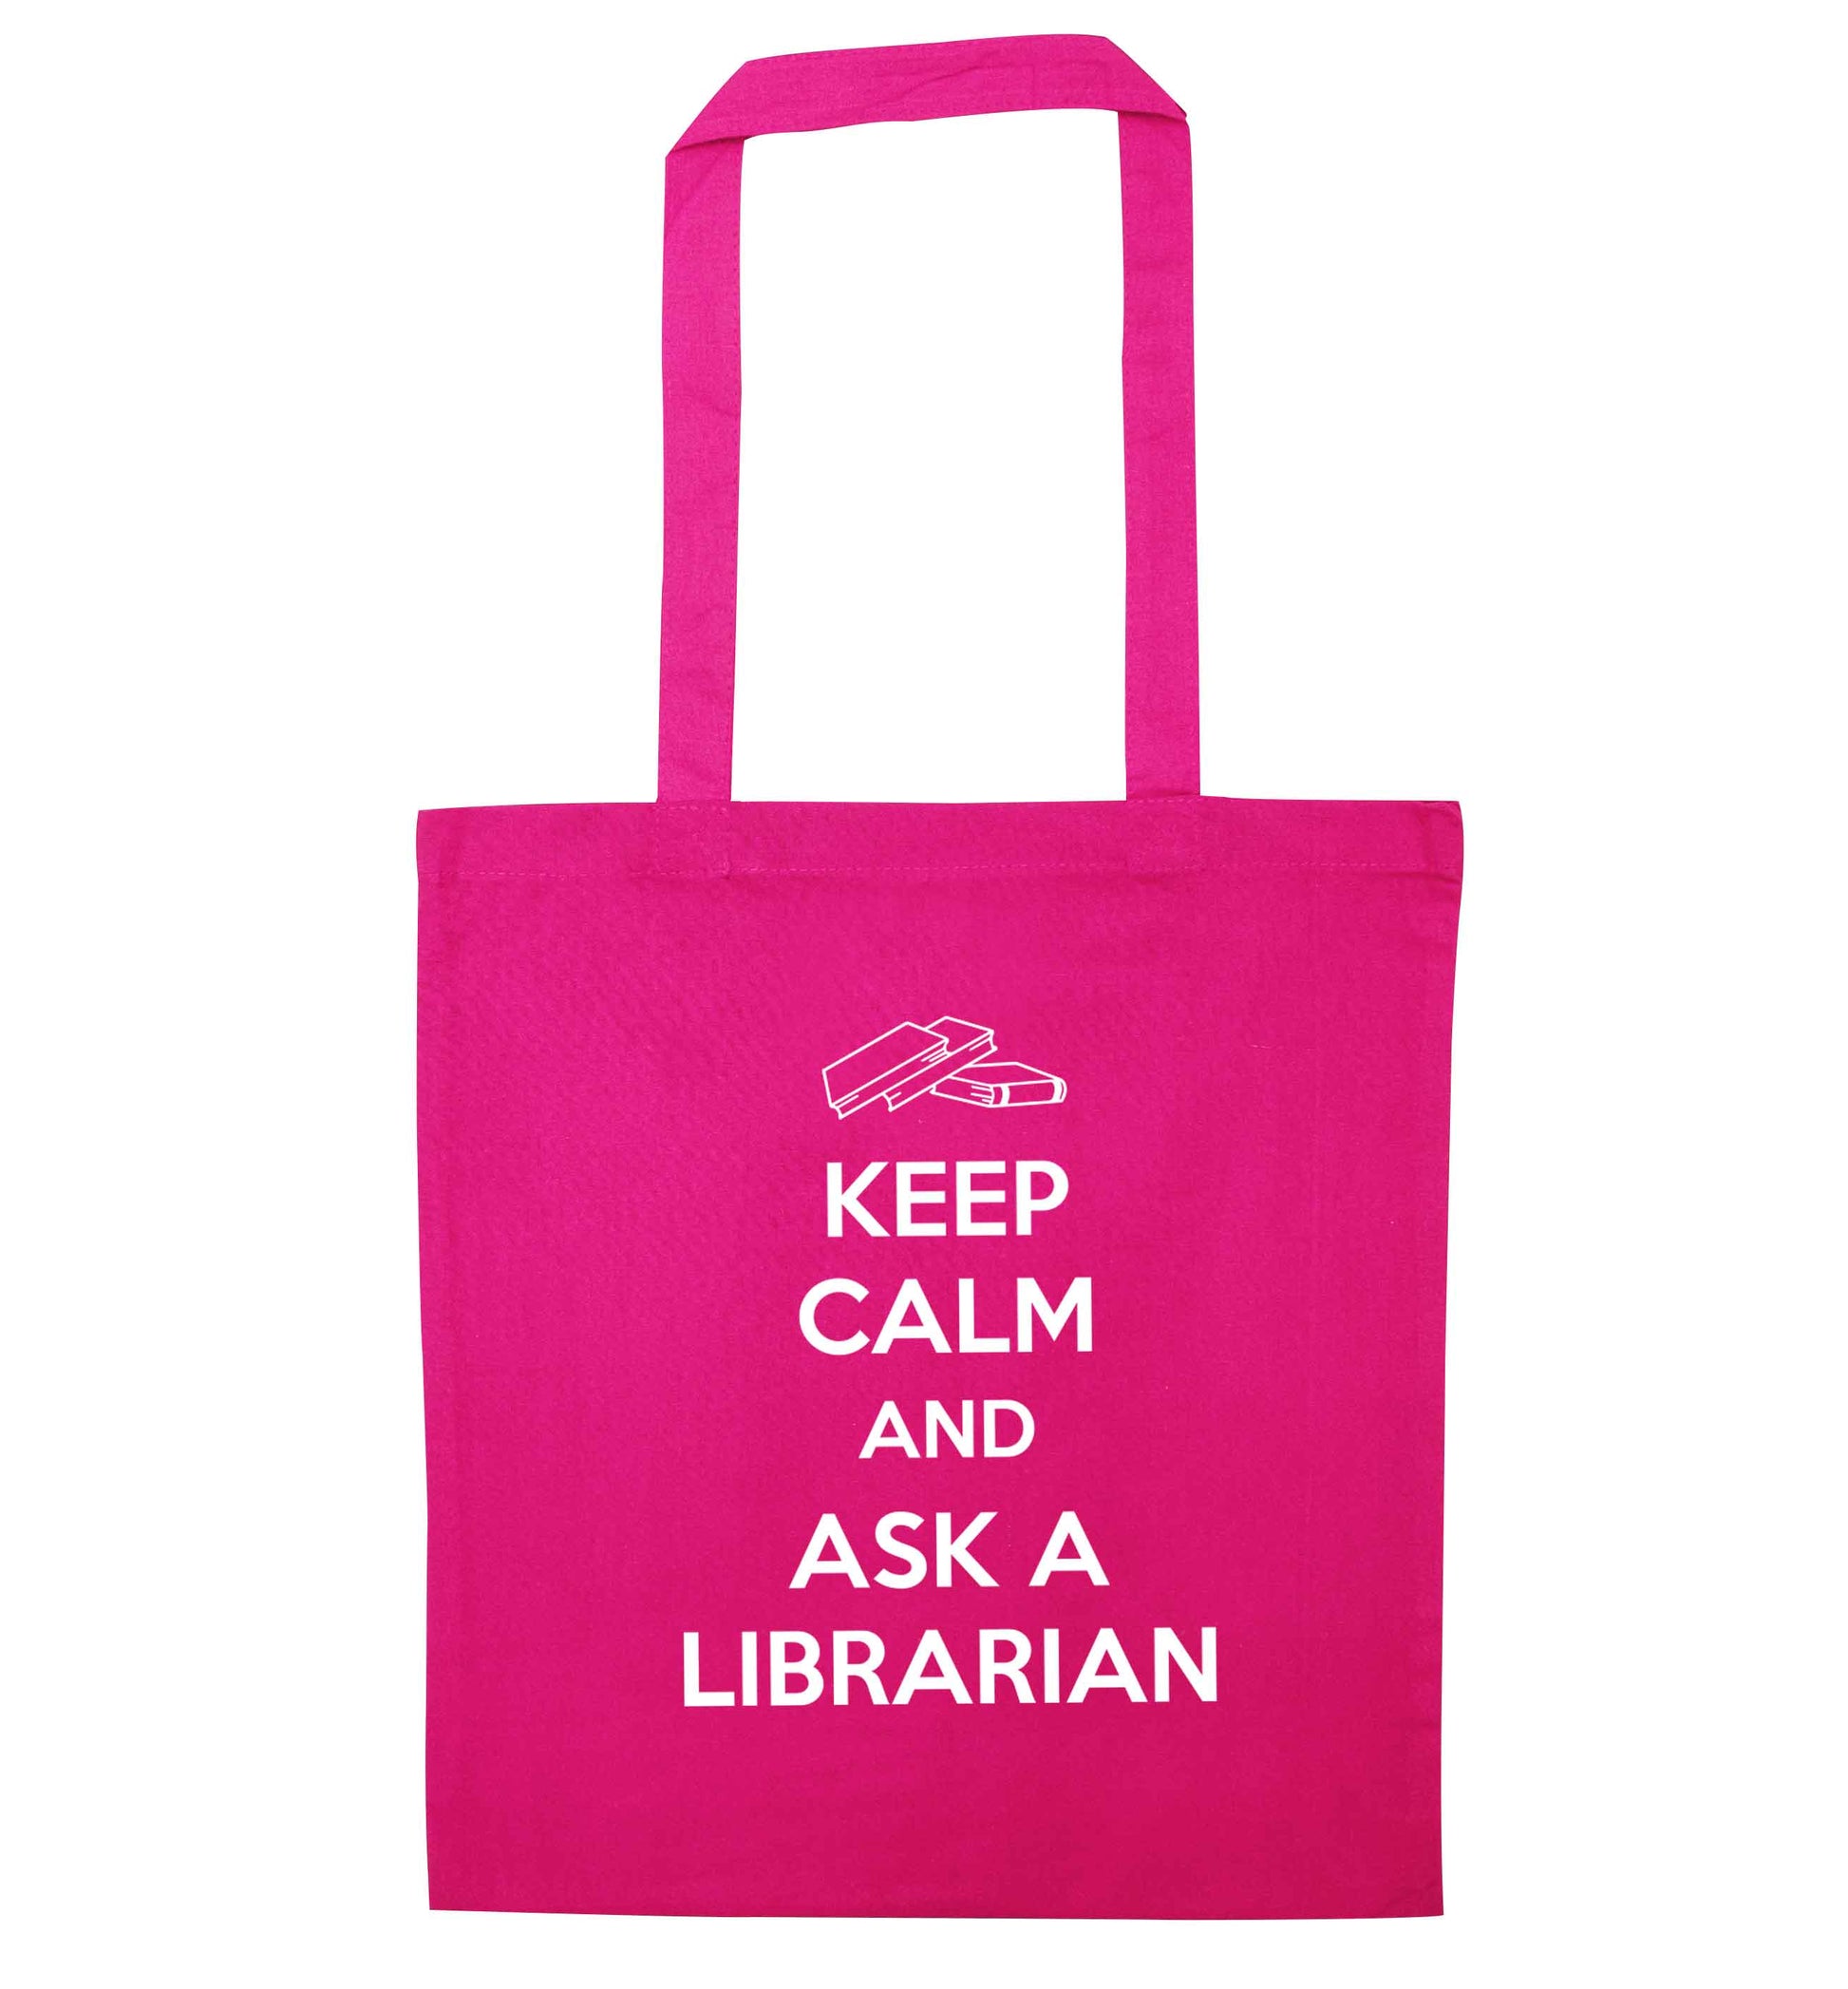 Keep calm and ask a librarian pink tote bag